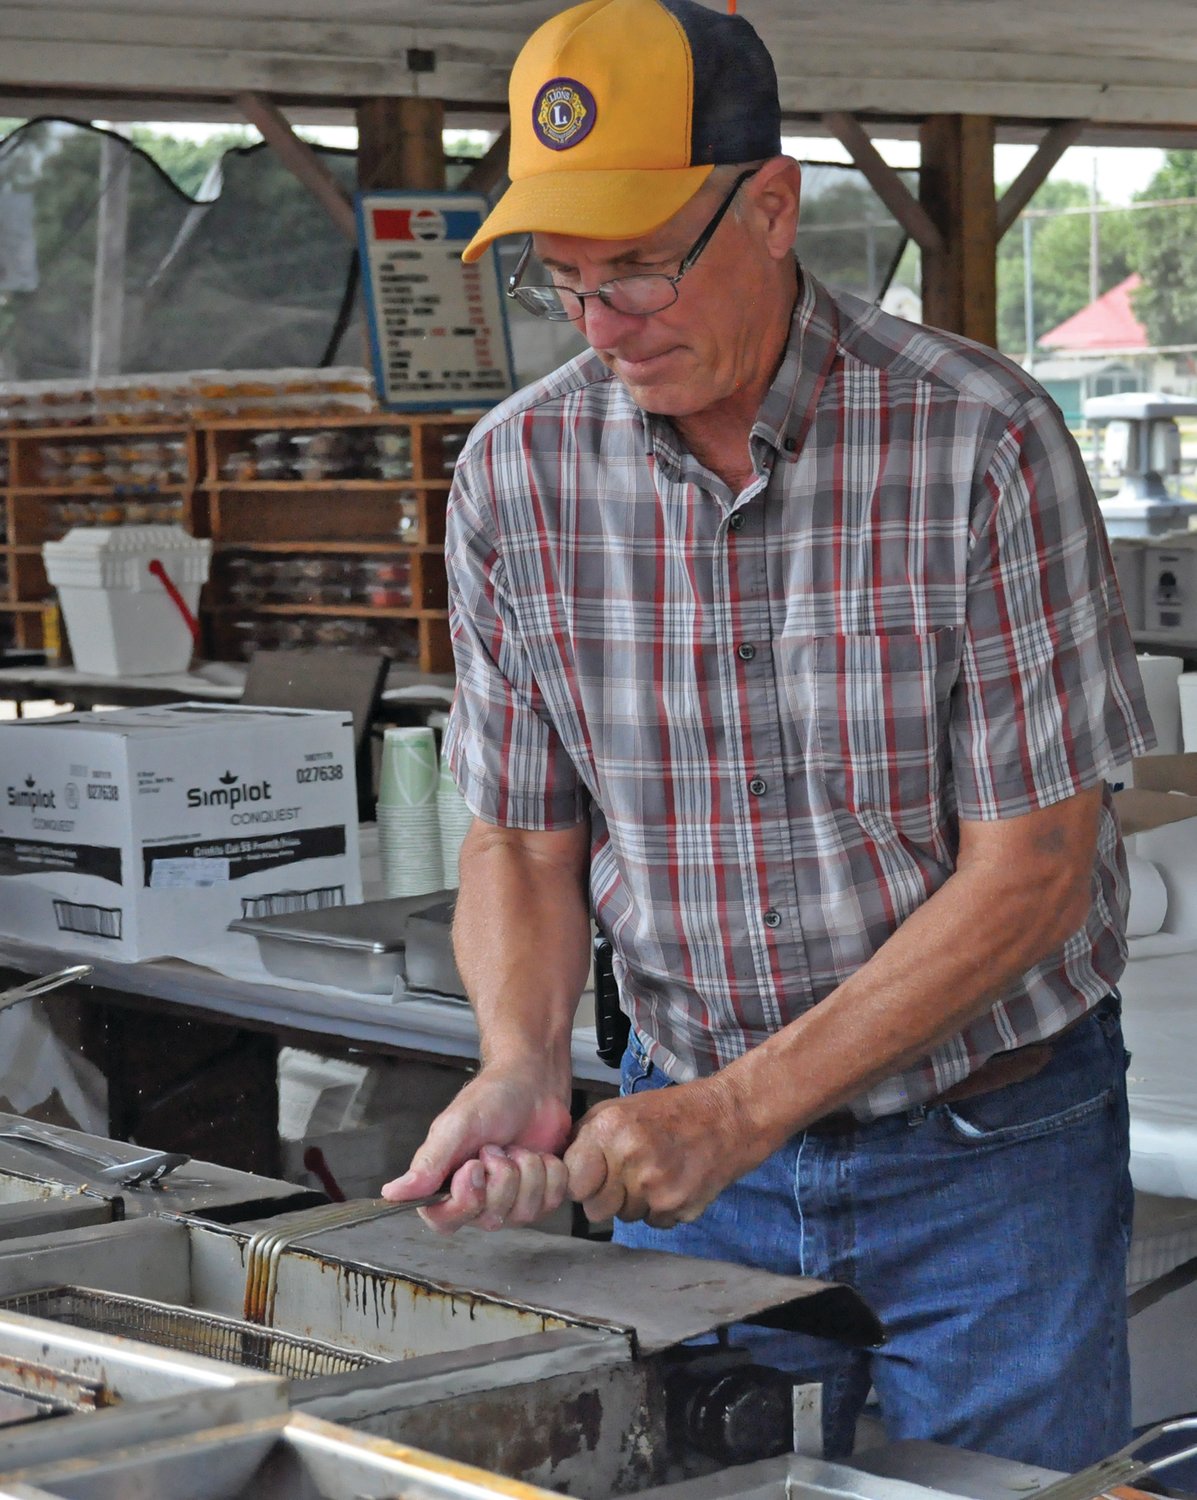 Alan Hedge places a fry pot in a vat at the Ladoga Lions Club Fish Fry on Friday. The 81st annual event featured live music, fireworks, carnival rides and vendor booths.